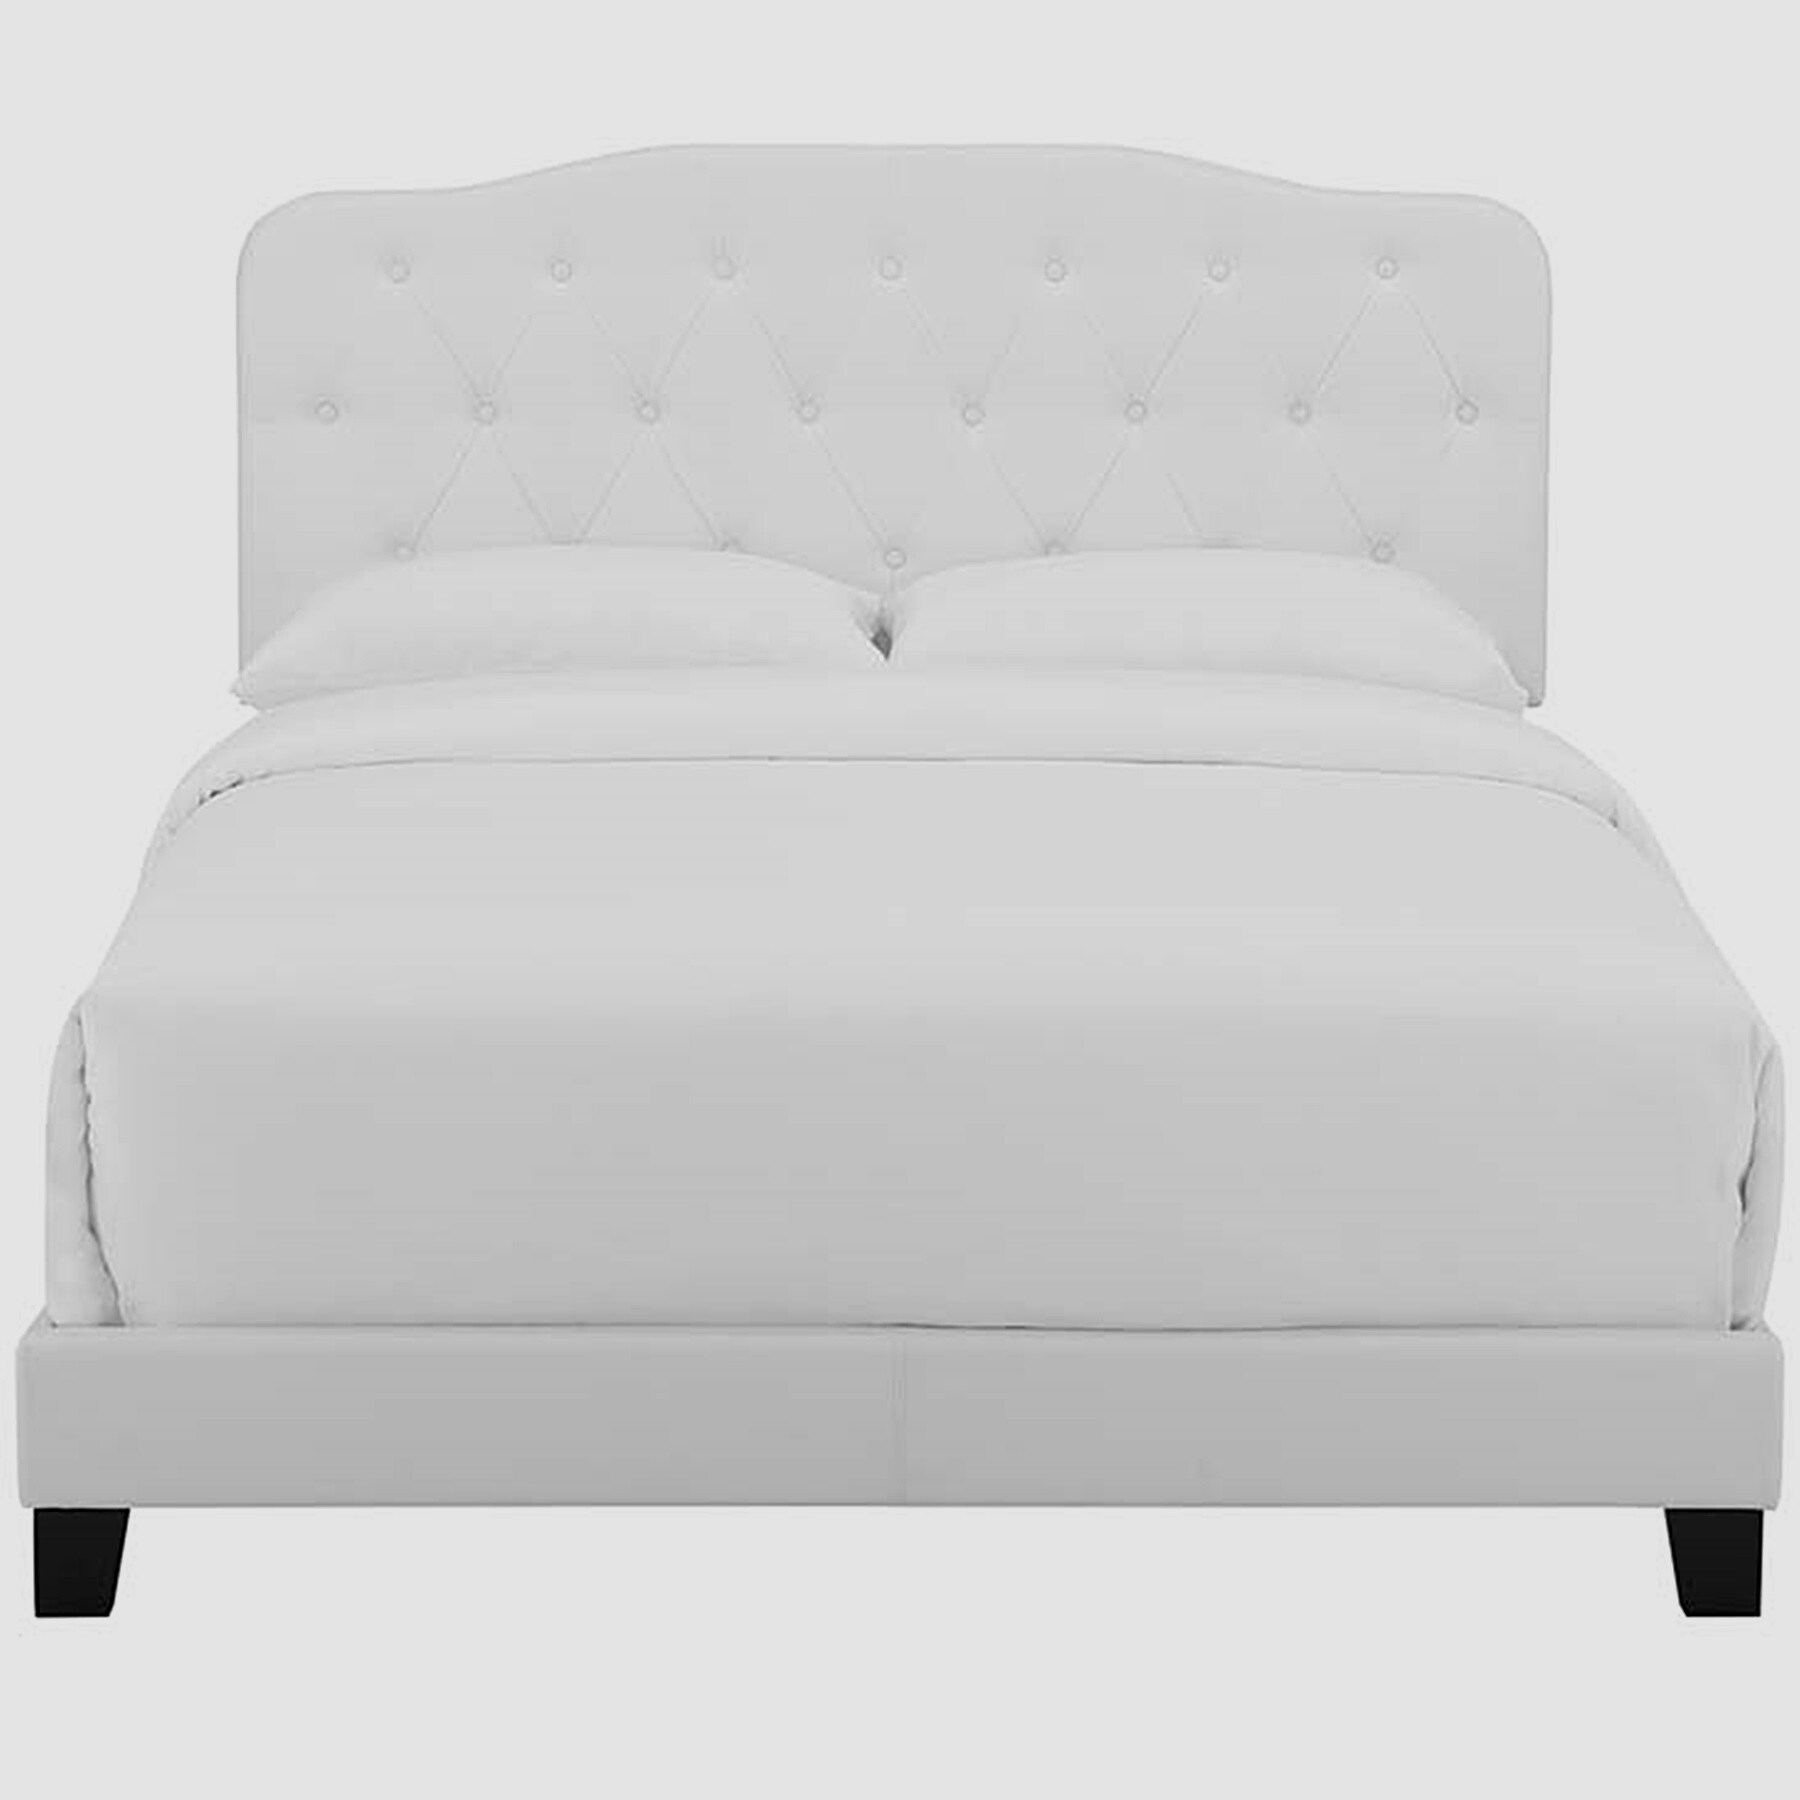 Dayton Full Size White Leather Platform Bed with Button Tufted Headboard